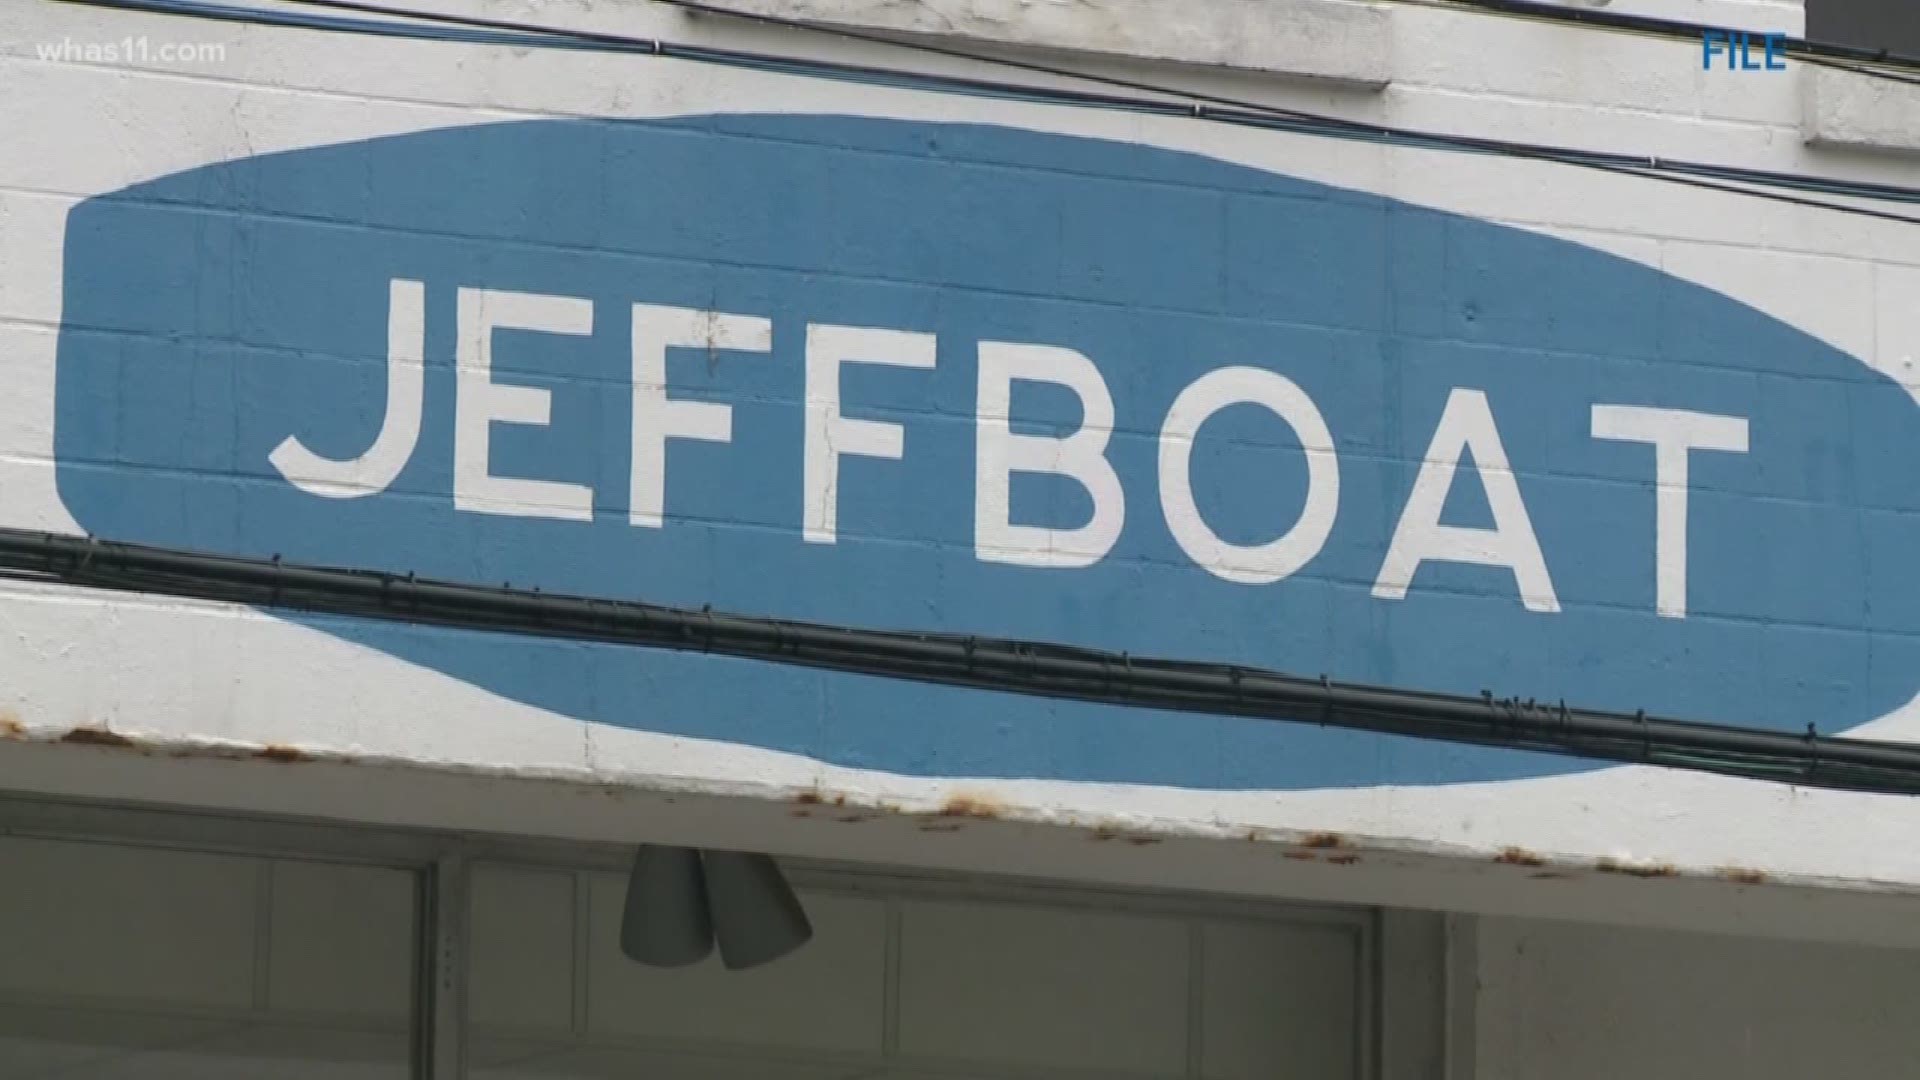 Jeffboat opened their gates at 8 a.m. with the auction opening at 9 a.m. and they are getting rid of everything from wrenches and office supplies to big cranes.